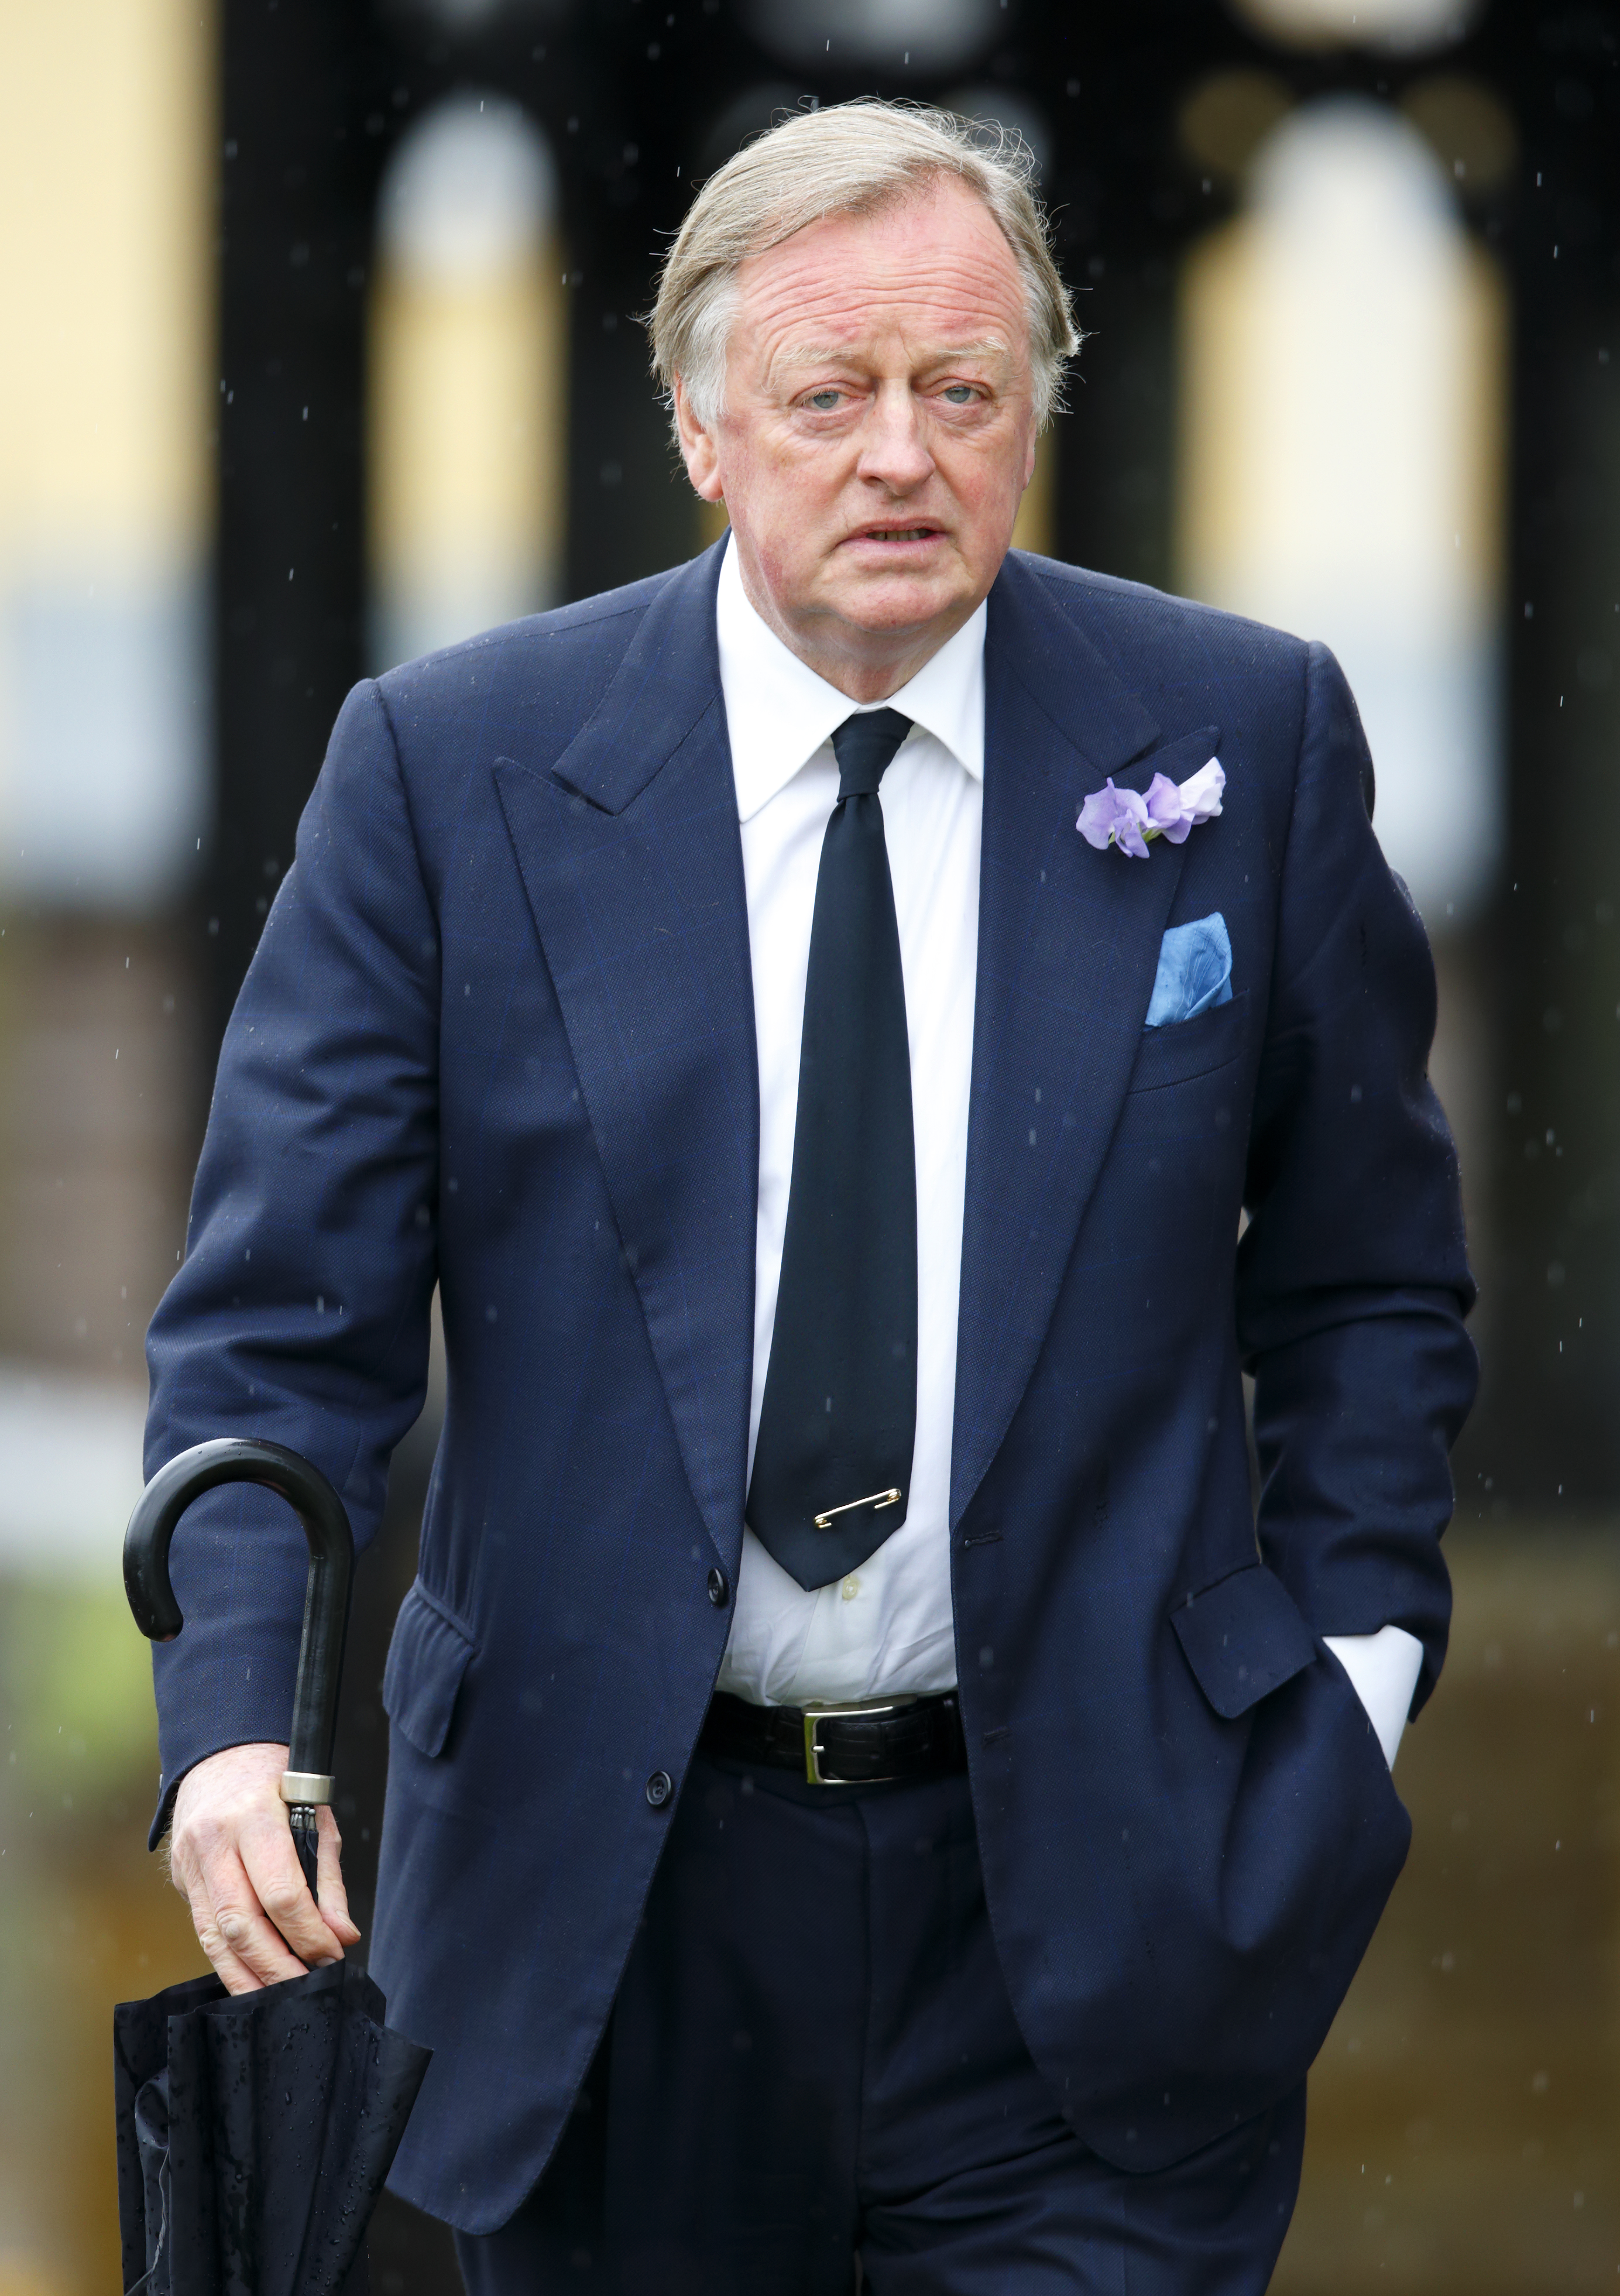 Andrew Parker Bowles married Camilla in 1973 before they divorced in 1995